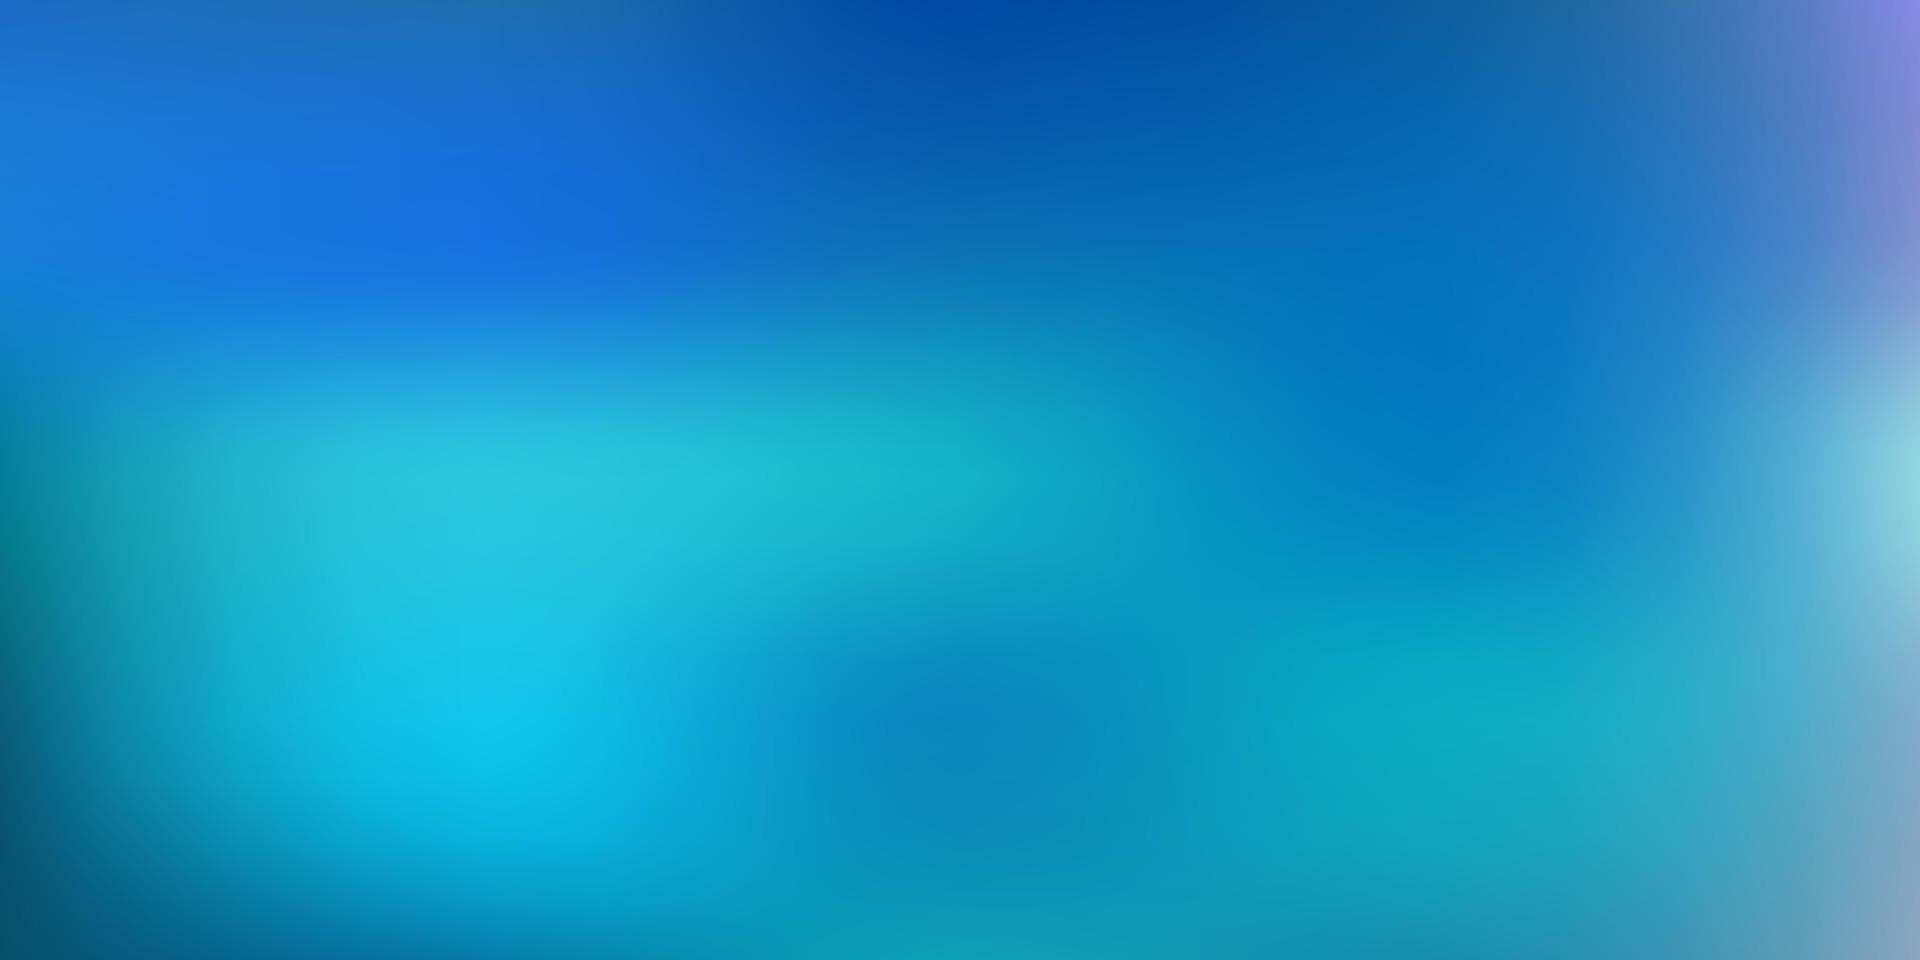 Light pink, blue vector abstract blur background.